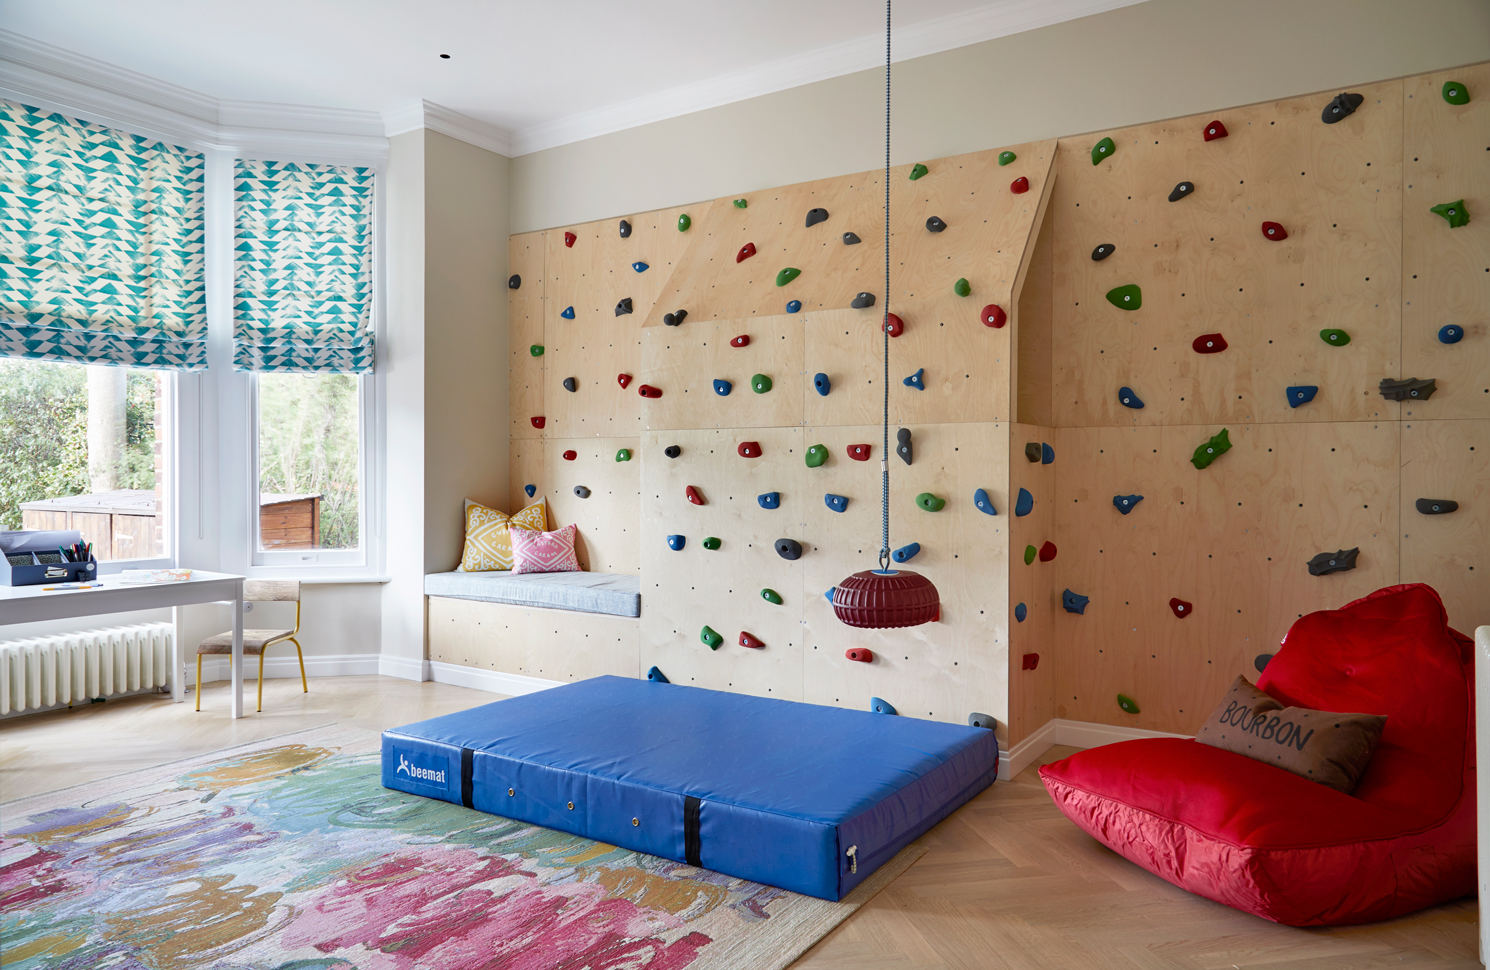 Playroom, featuring climbing walls and vibrant hues to foster creativity and exploration. Designed with ingenious elements and flexible layouts, each space evolves with the family's needs, ensuring longevity and adaptability. Built-in climbing walls offer endless adventures, with heavy-duty PVC and premium foam mattresses from Bee Mat UK. For aspiring climbers in small spaces, explore Climb A Wall's 6 Indoor Panel Climbing Wall Kit. At the heart of the room, find the Monkey Tree Swing from Brave Toys, amidst the excitement.